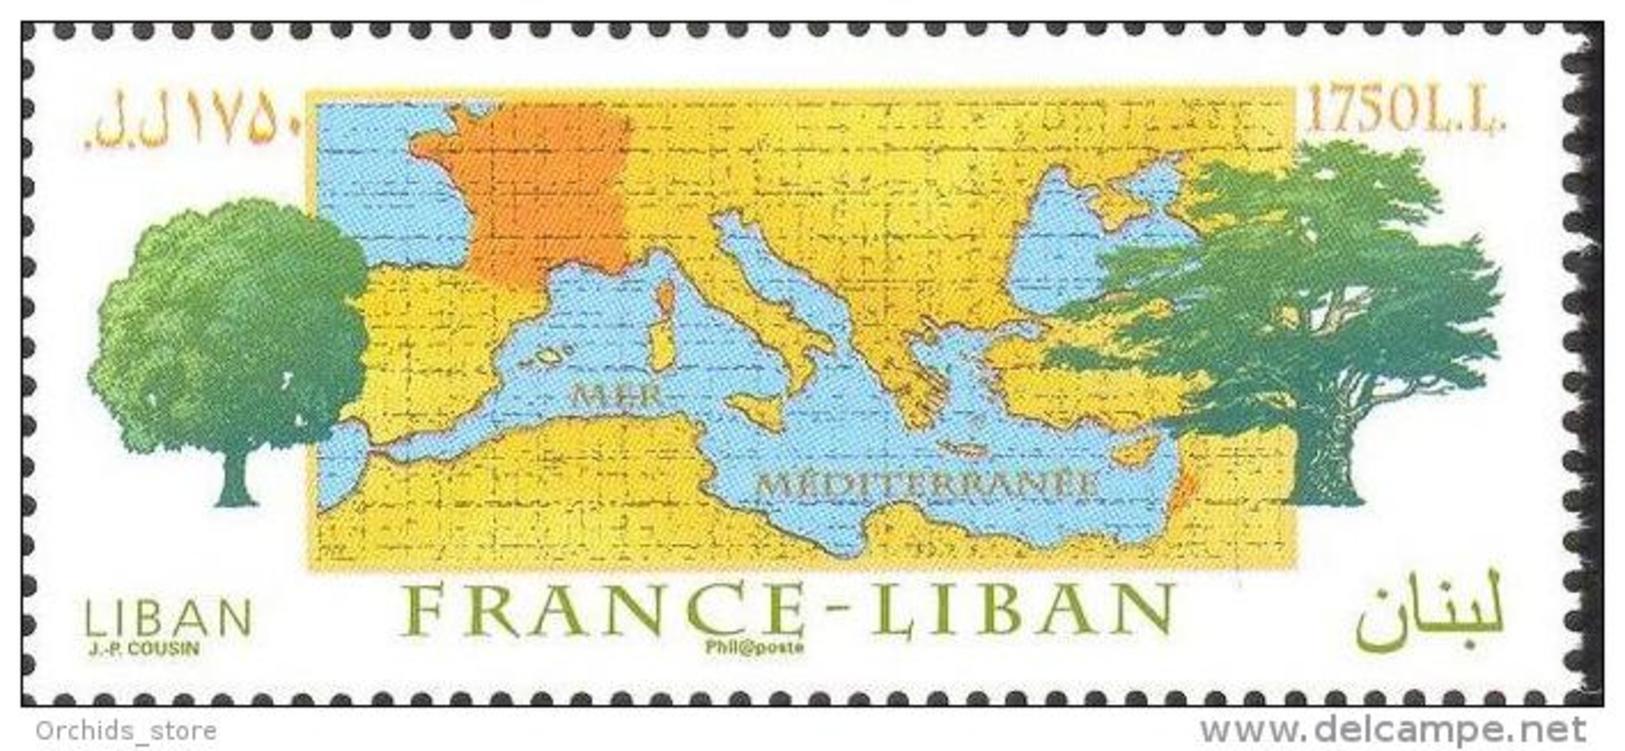 Lebanon 2008 Mi. 1501 MNH Stamp - FRANCE-LEBANON RELATIONS - Joint Issue Between Both Countries - Lebanon